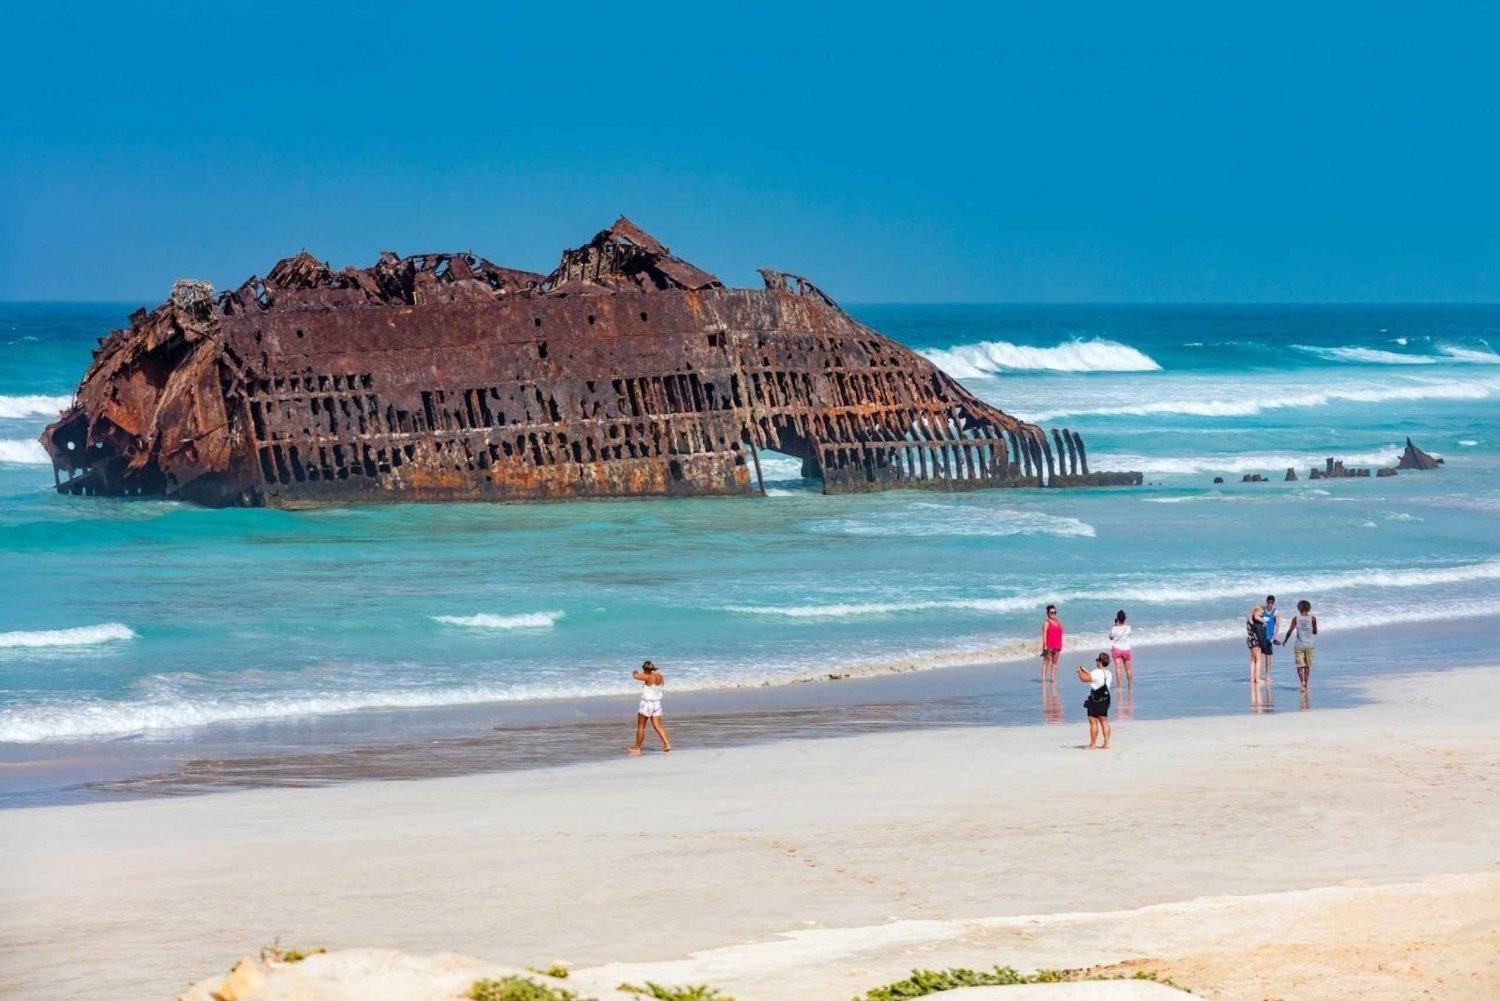 Postcards of Boa Vista 4x4 Tour with Shipwreck & Local Lunch